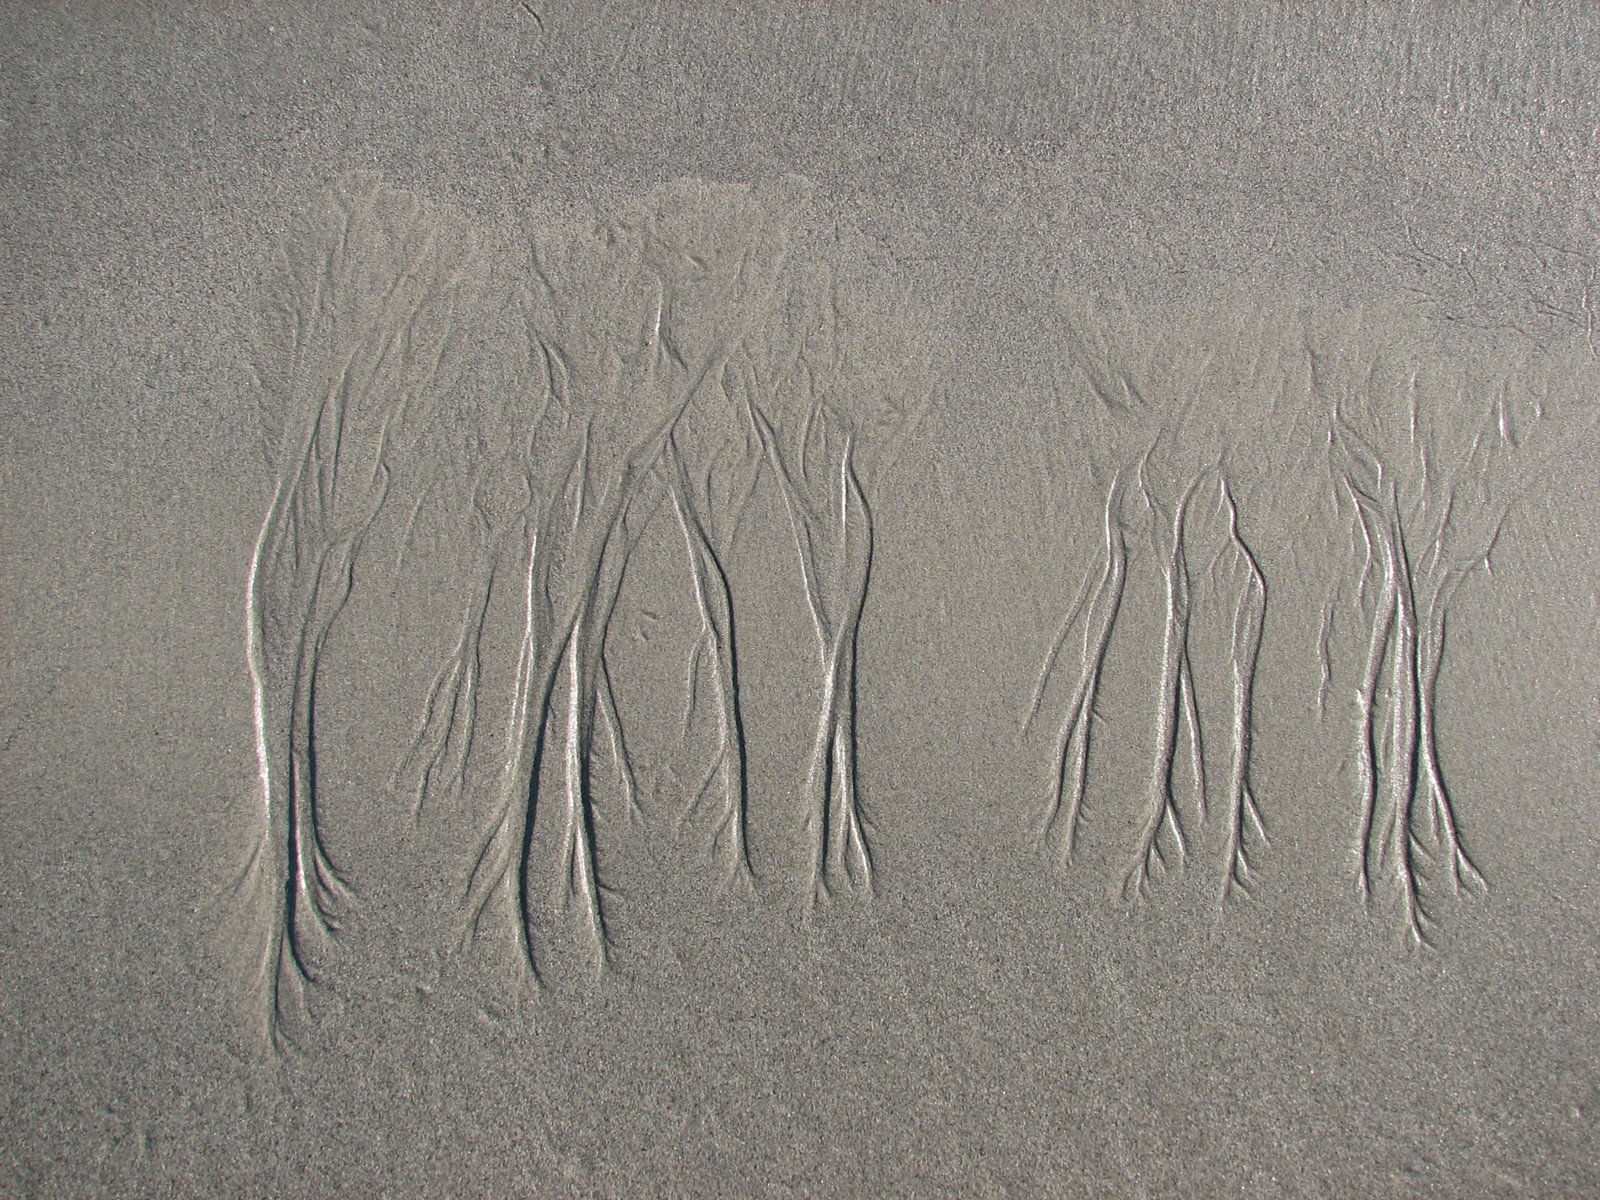 a group of plants sprouting in sand next to the ocean